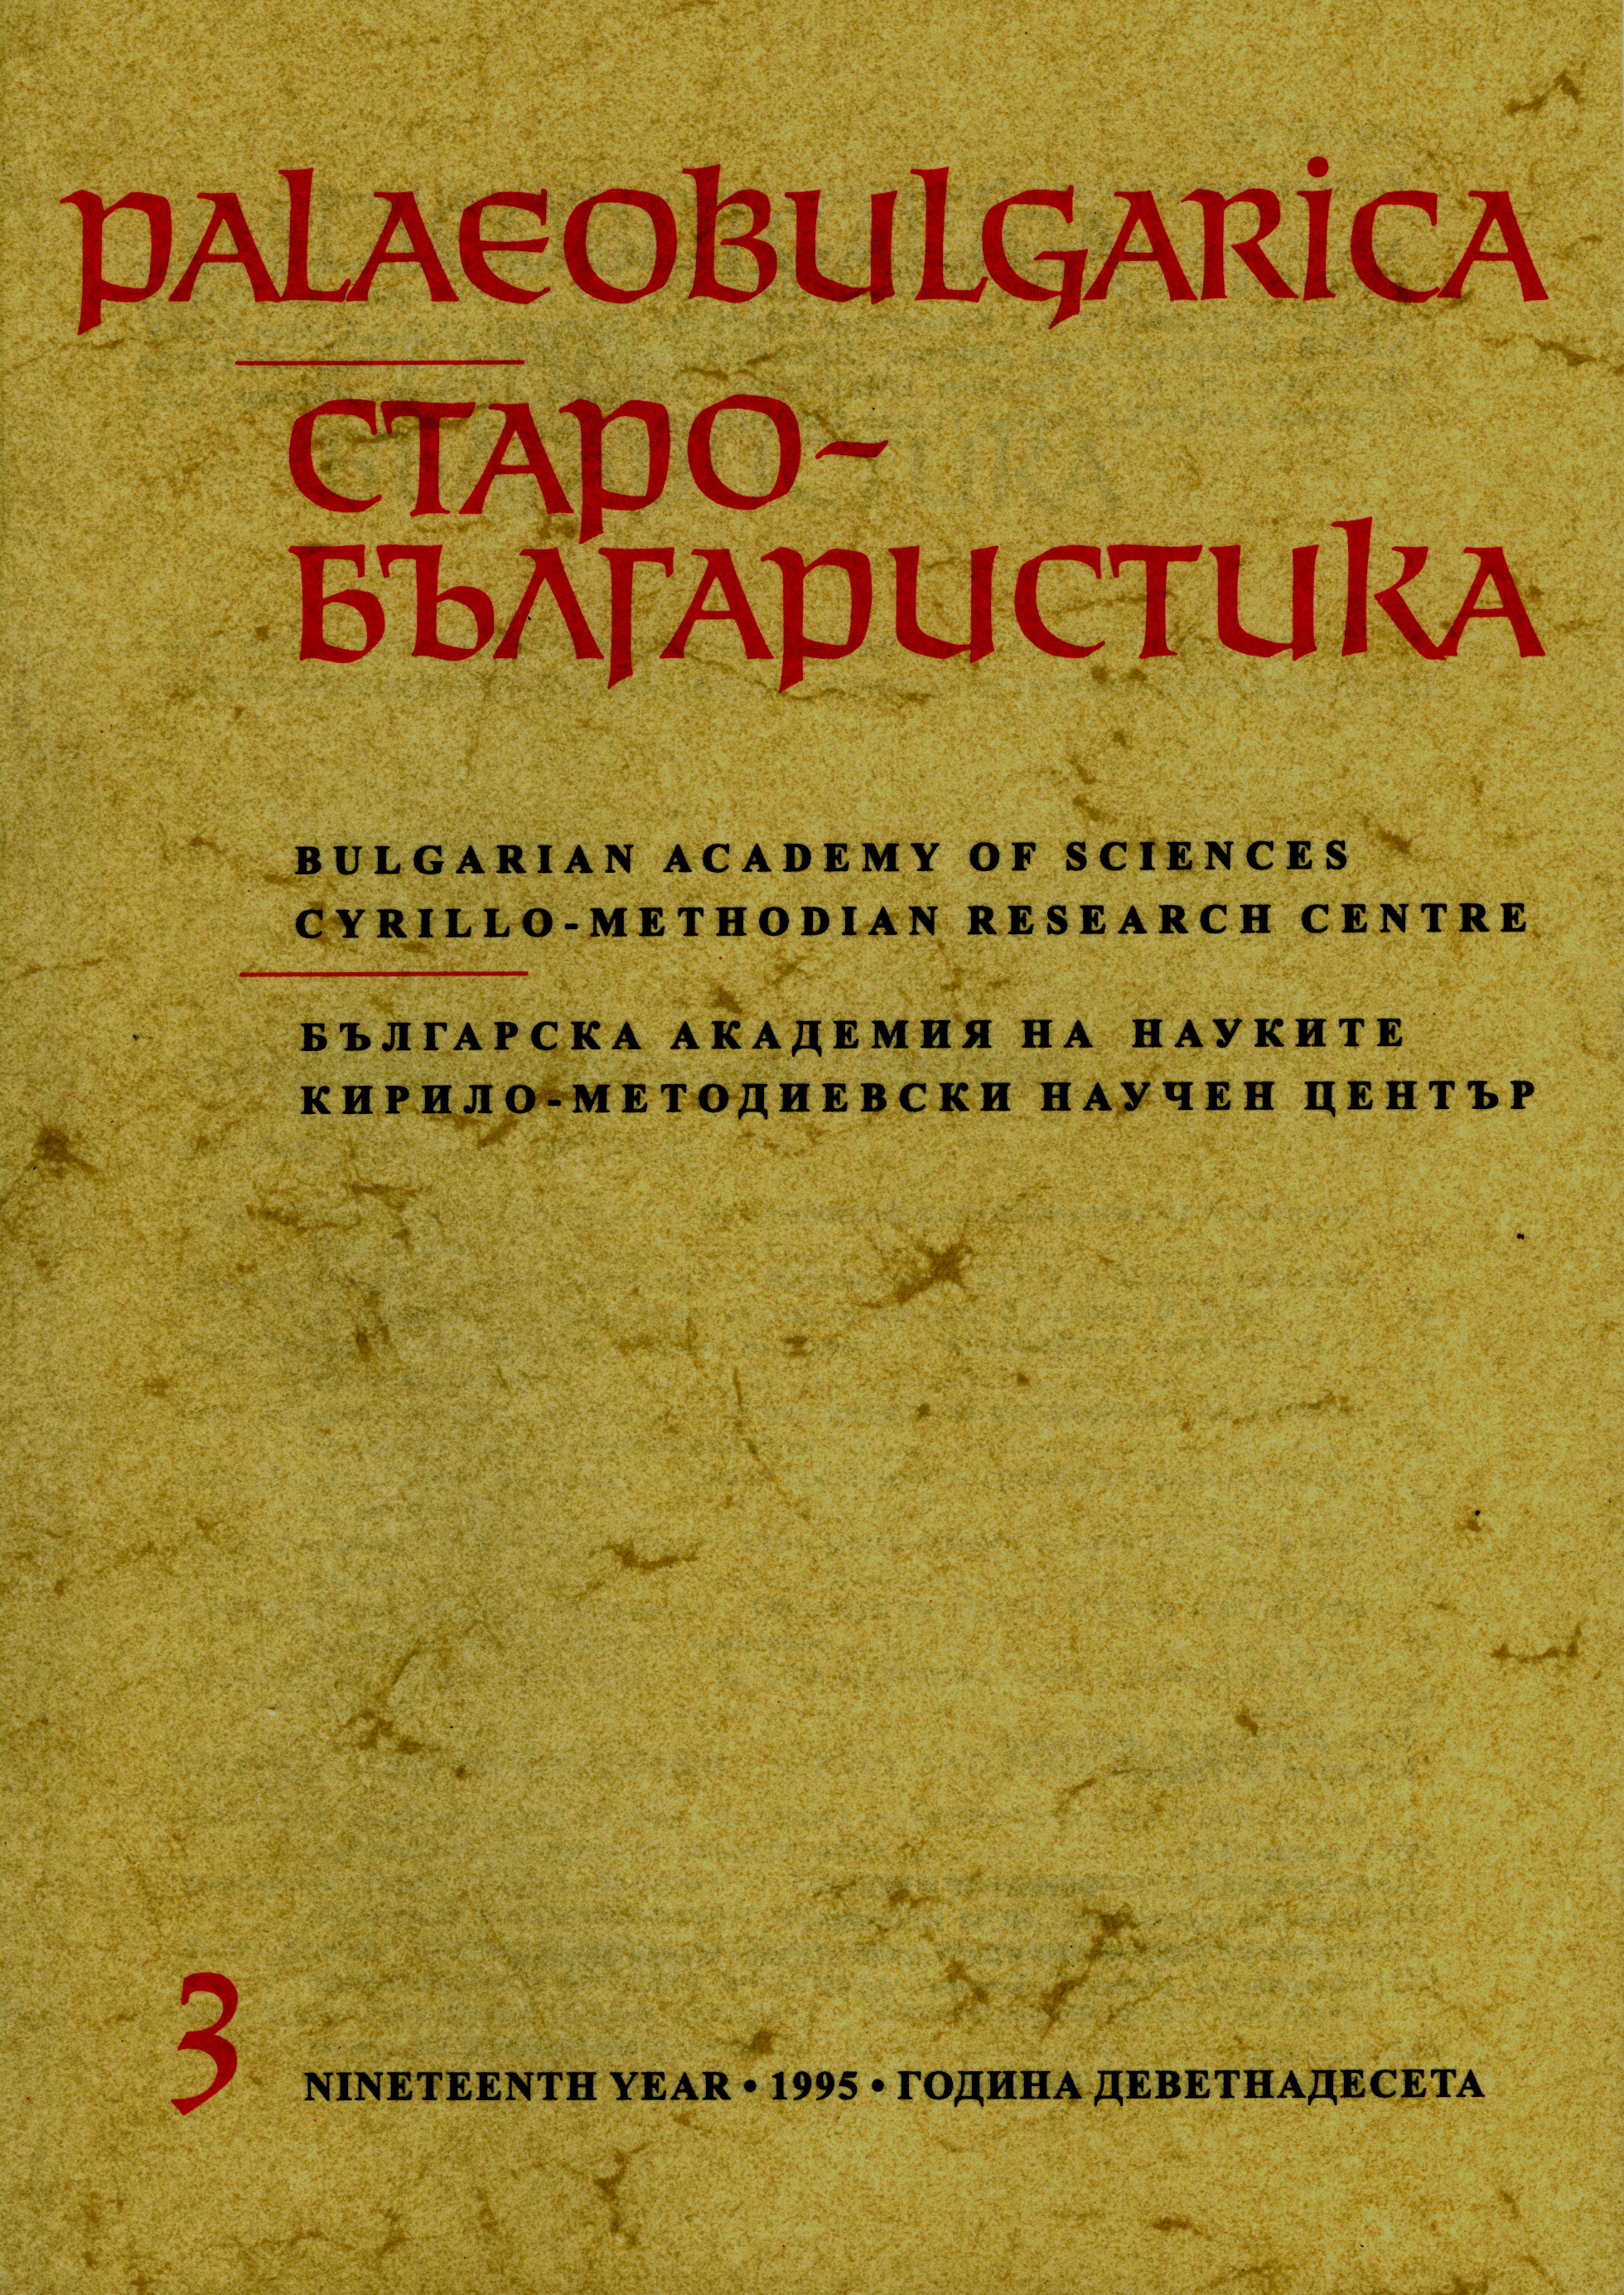 New Copies of the Sermons of Clement of Ohrid Cover Image